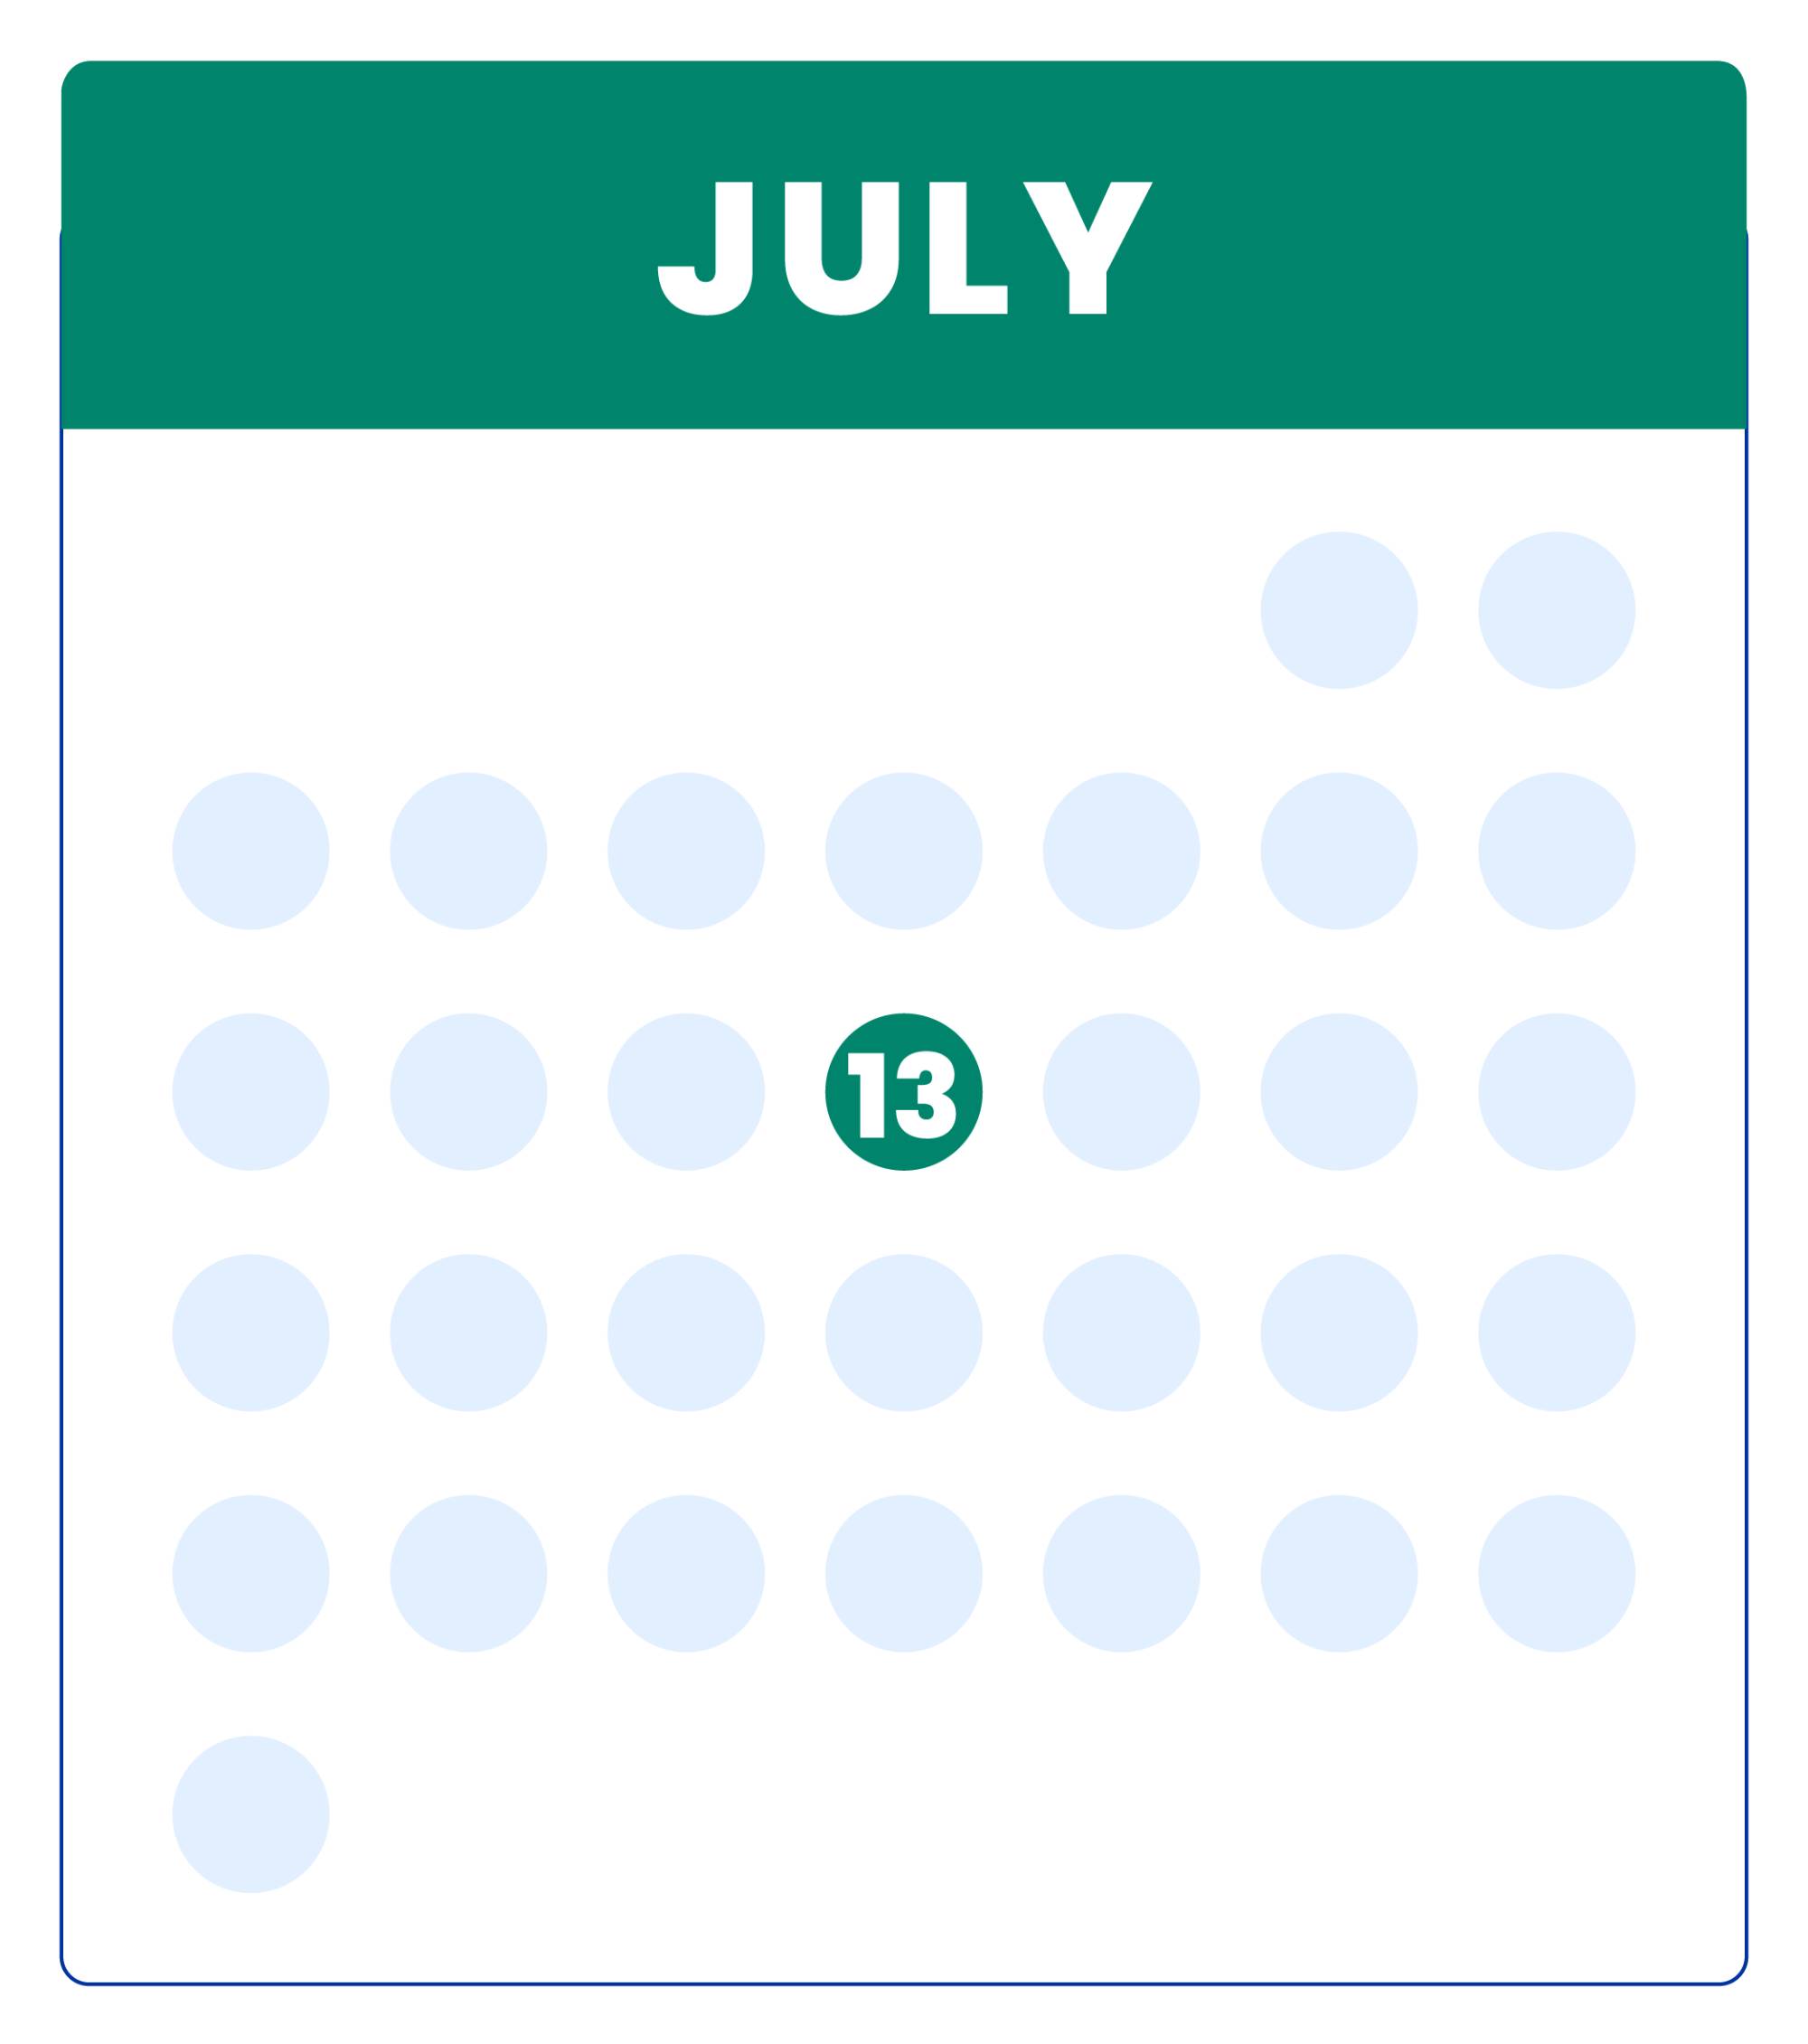 Calendar graphic with July 13, 2022 highlighted